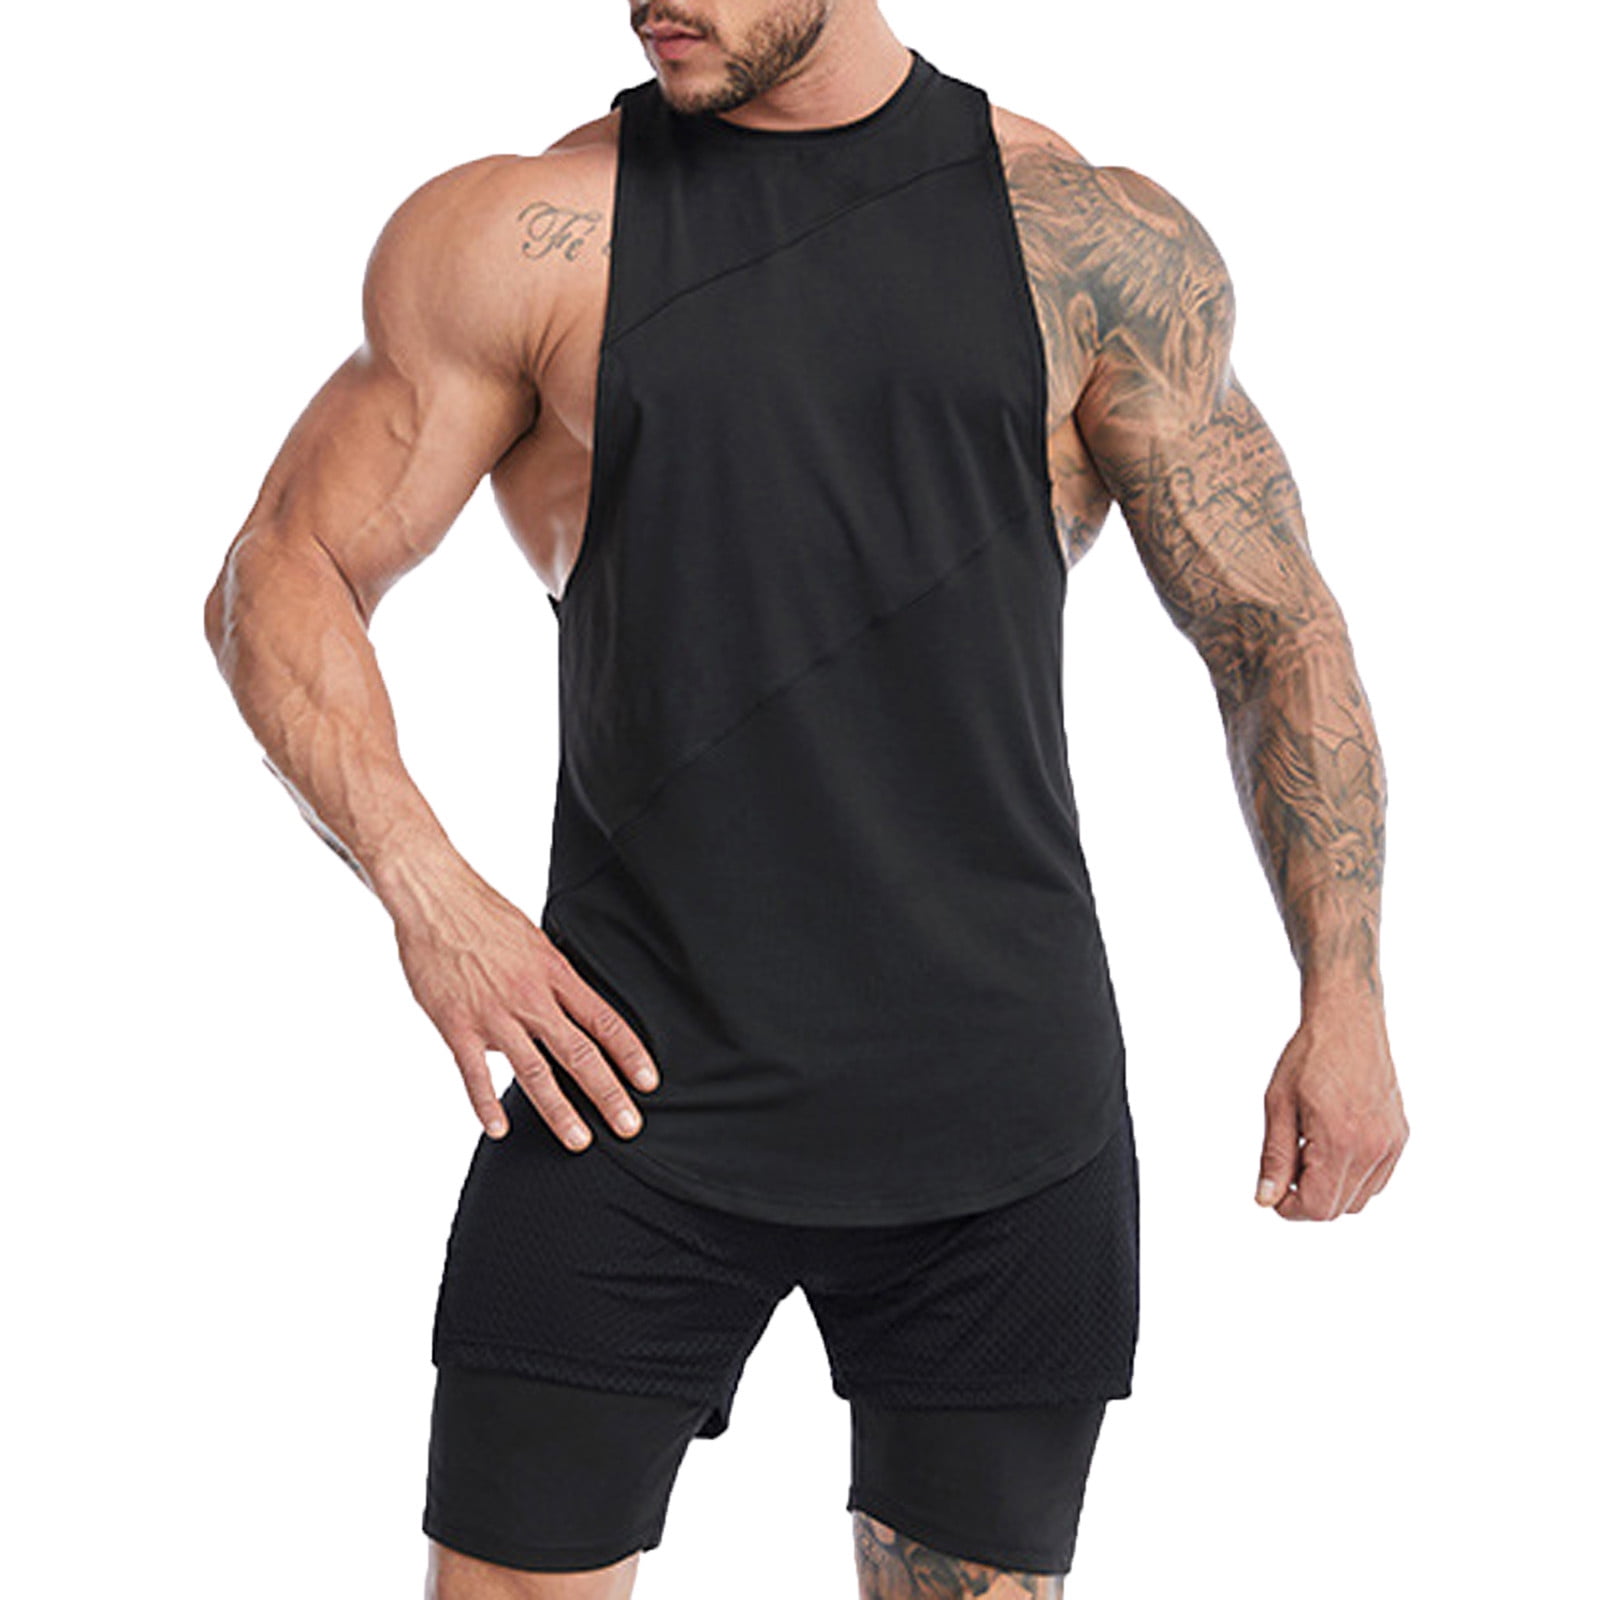 TKing Fashion Mens Shirts Sports Vest Men'S Tight-Fitting Sleeveless  Fitness Suit Basketball Running Yoga Quick-Drying Vest Shirts For Men(Black,M)  